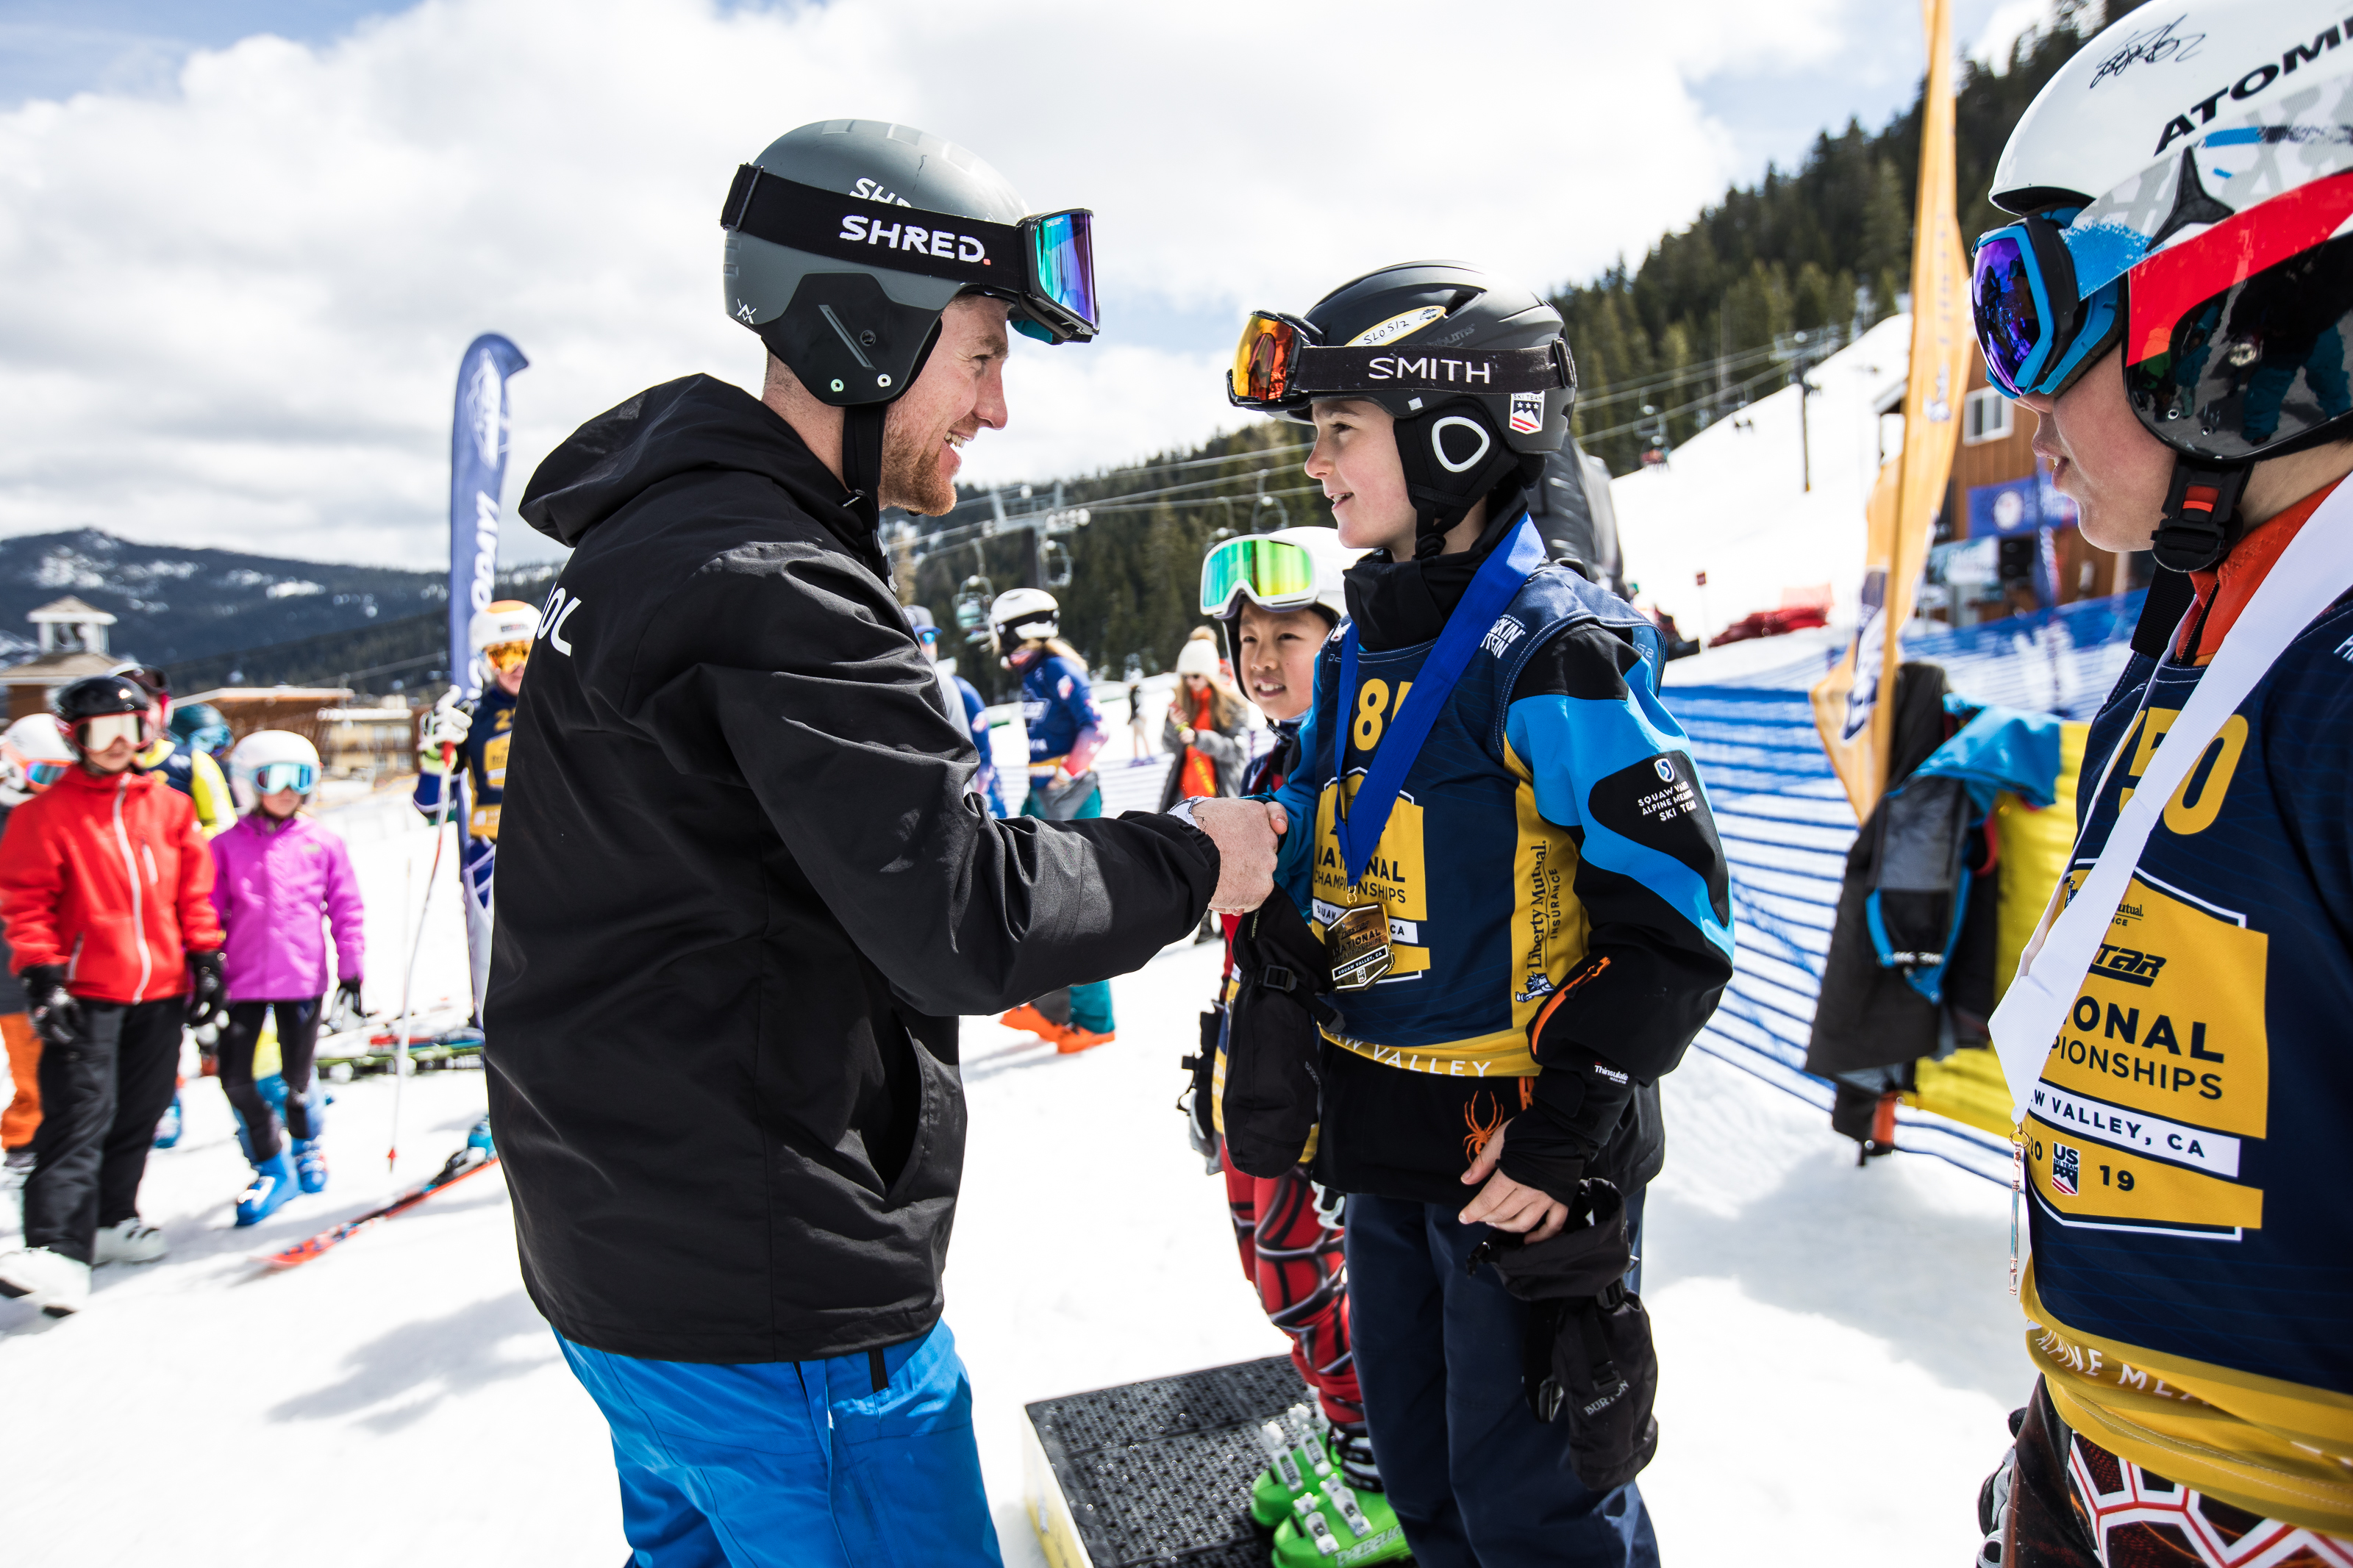 National Pacesetter and U.S. Ski Team member RCS hands out medals during Race of Champions